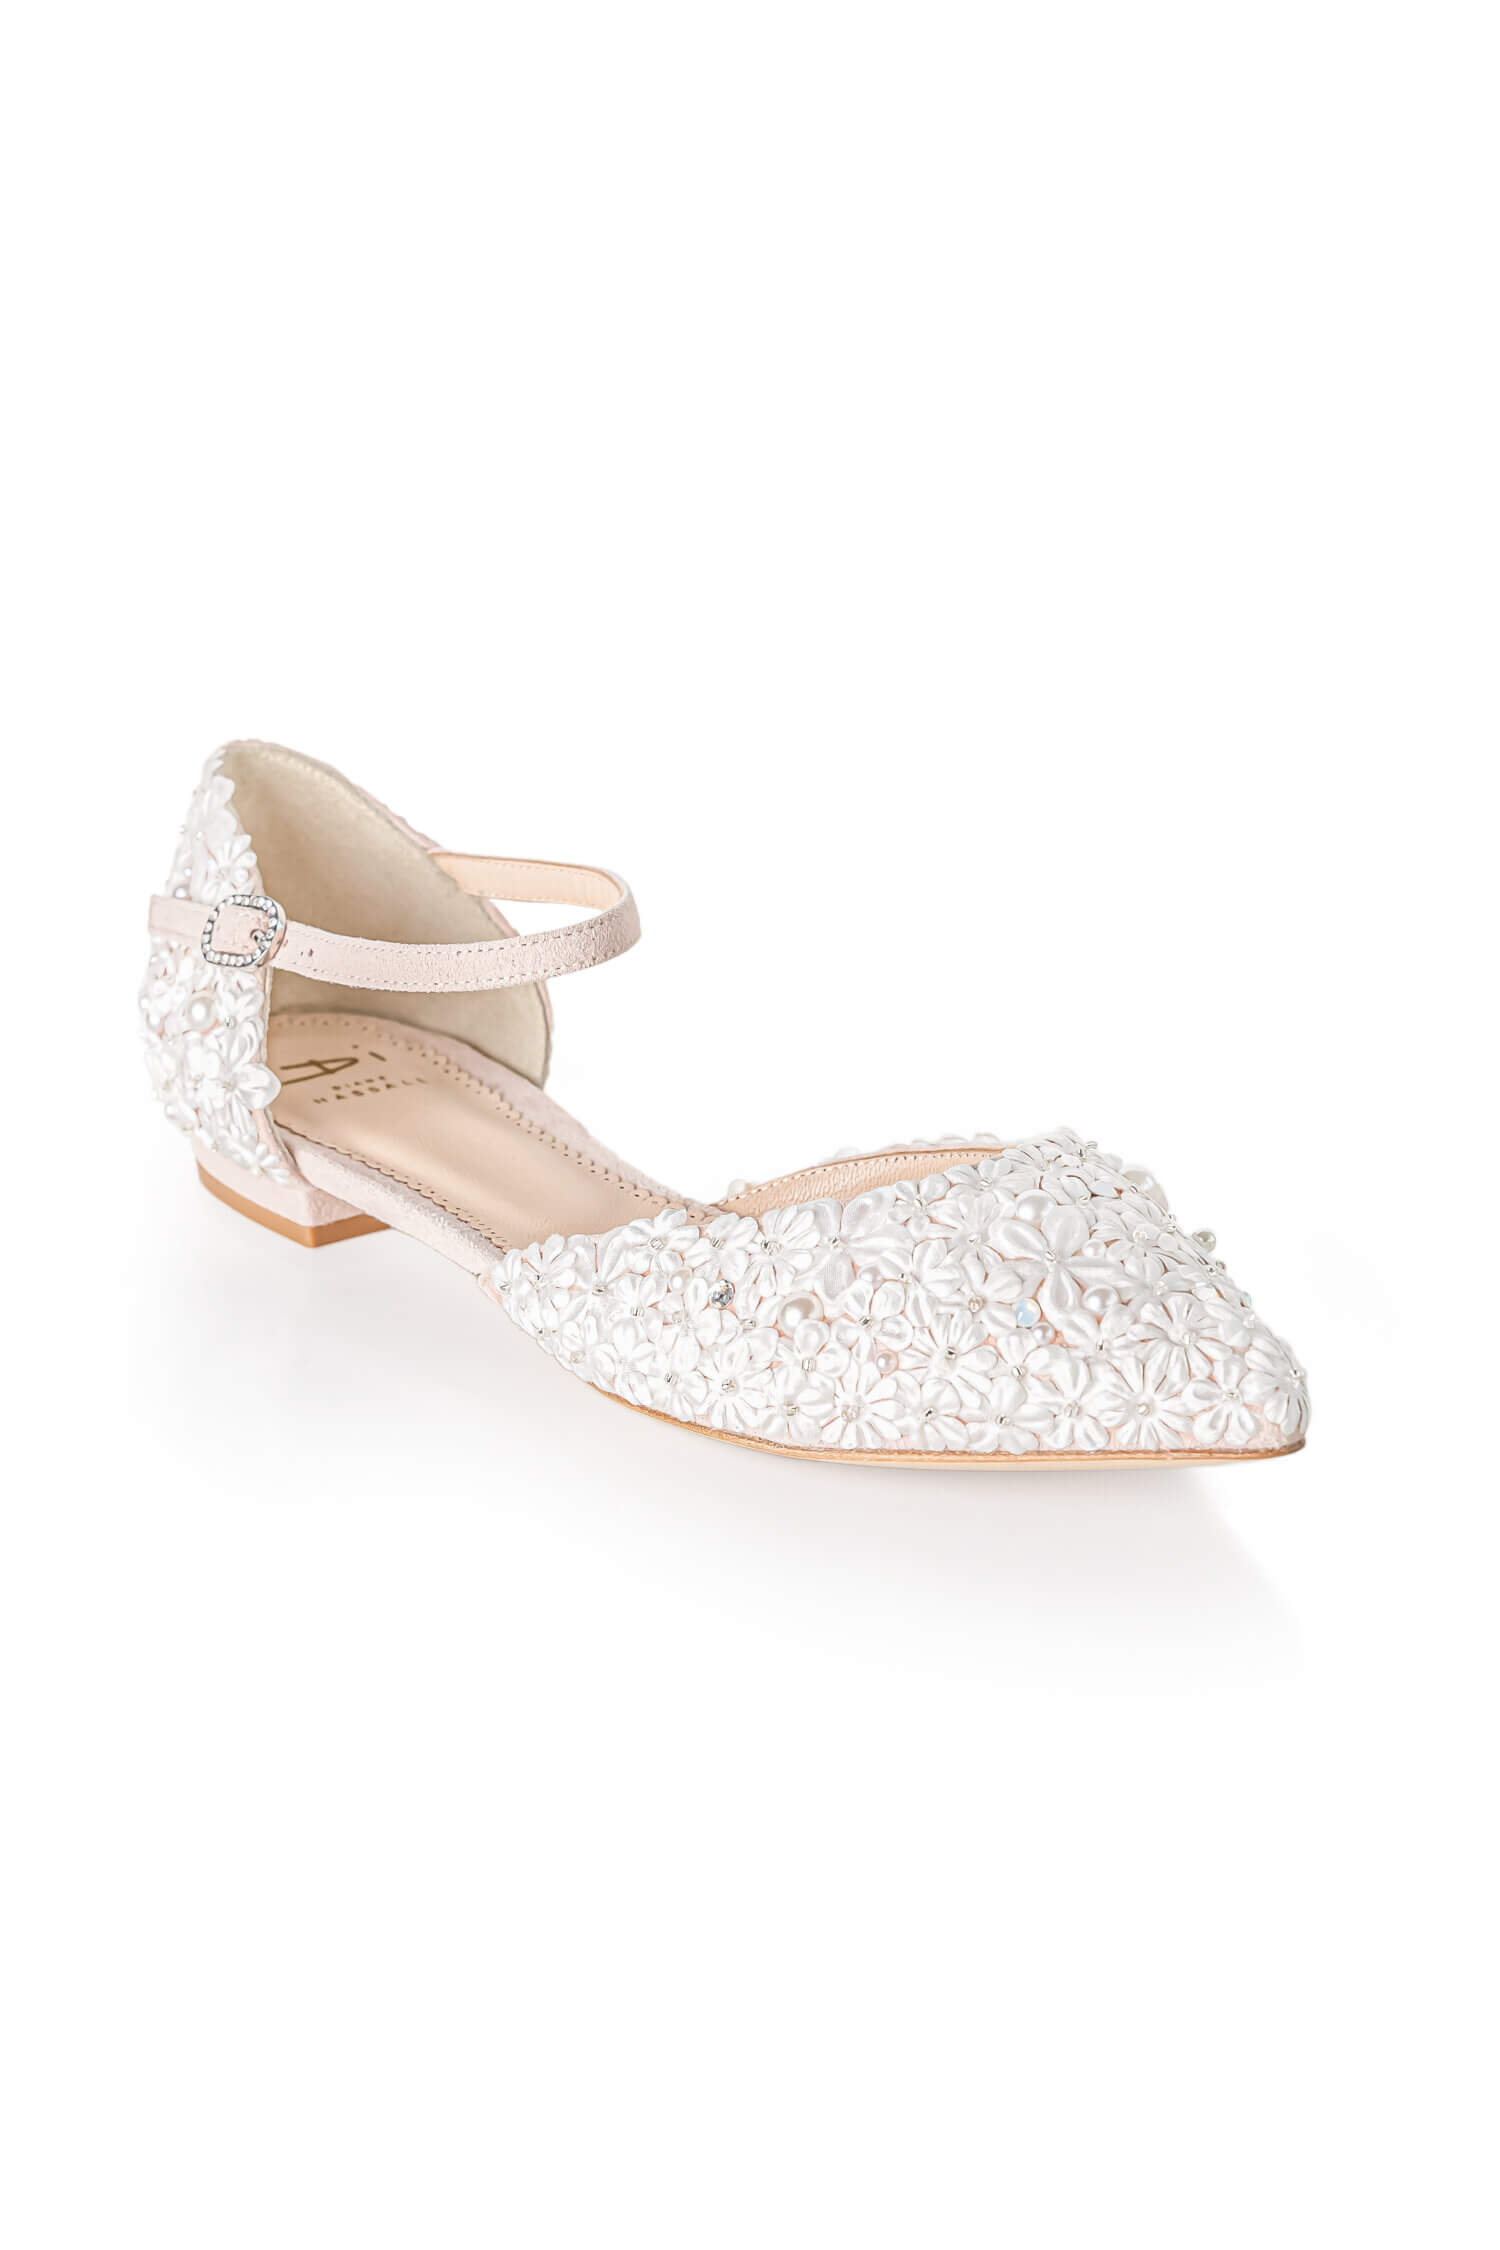 Lindy embellished bridal flats. Wedding shoes handmade by Di Hassall.